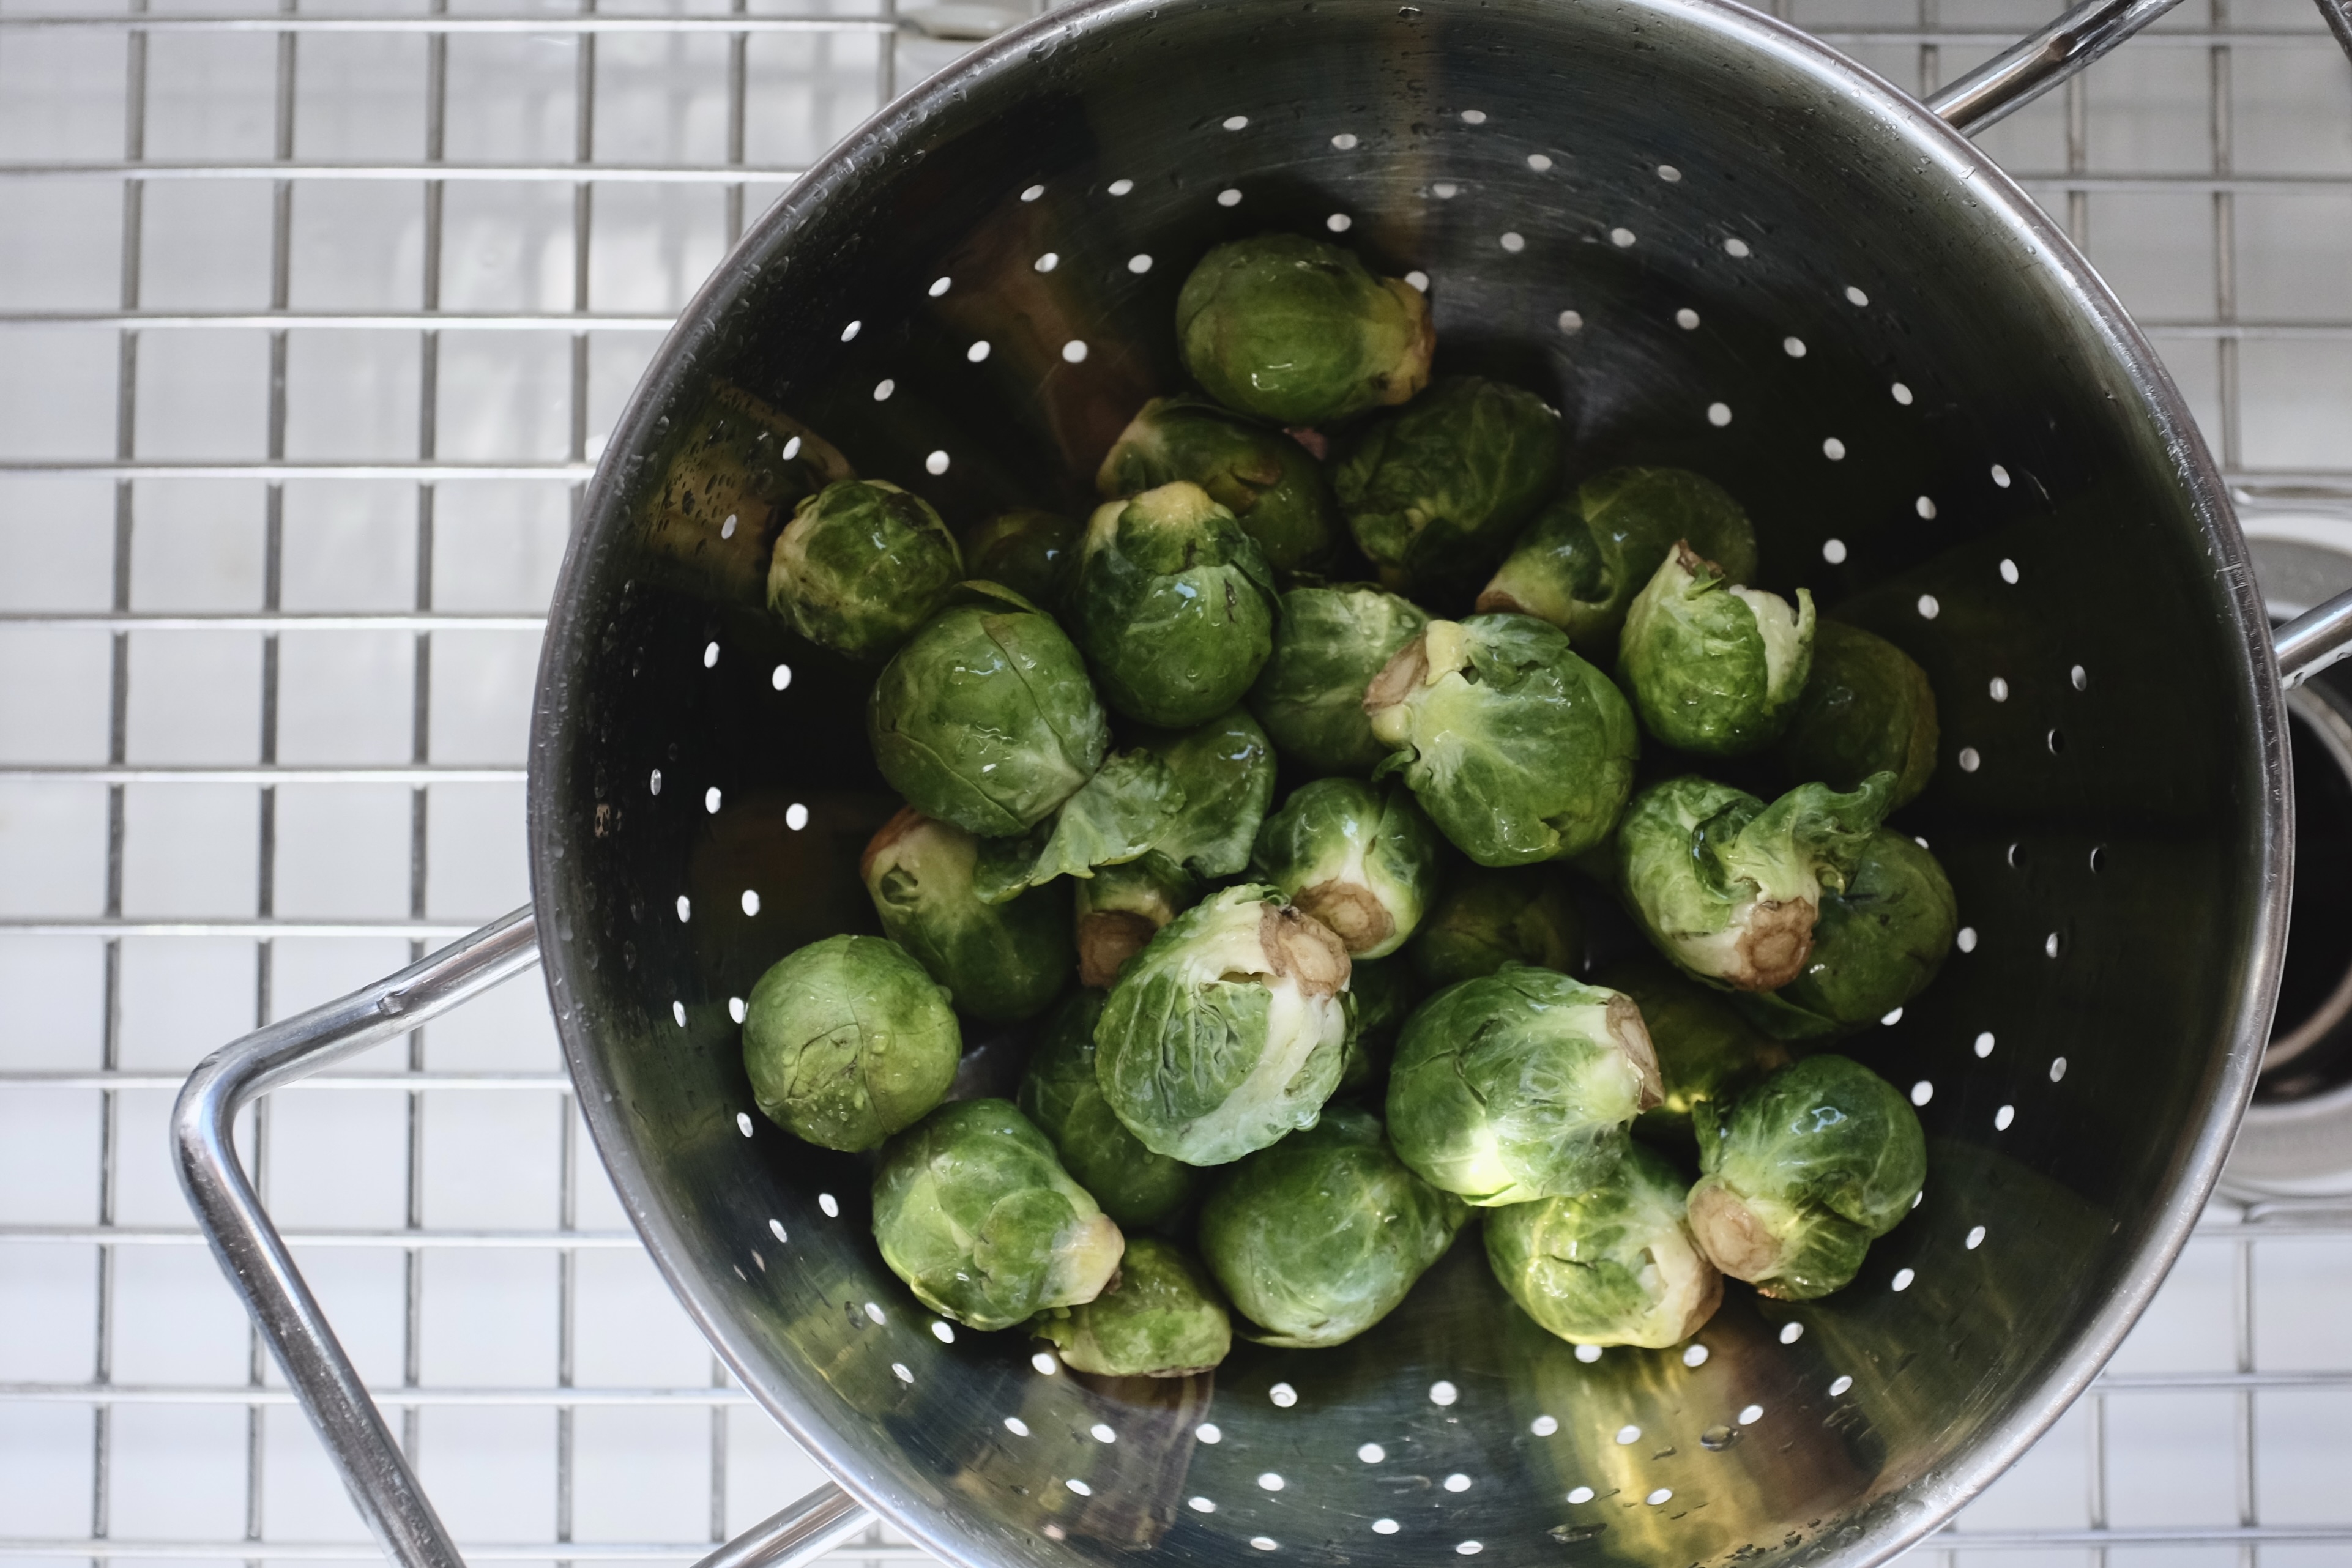 A pile of bright green brussels sprouts sit in a metal collander, in a white porcelain sink, photographed close and from above.